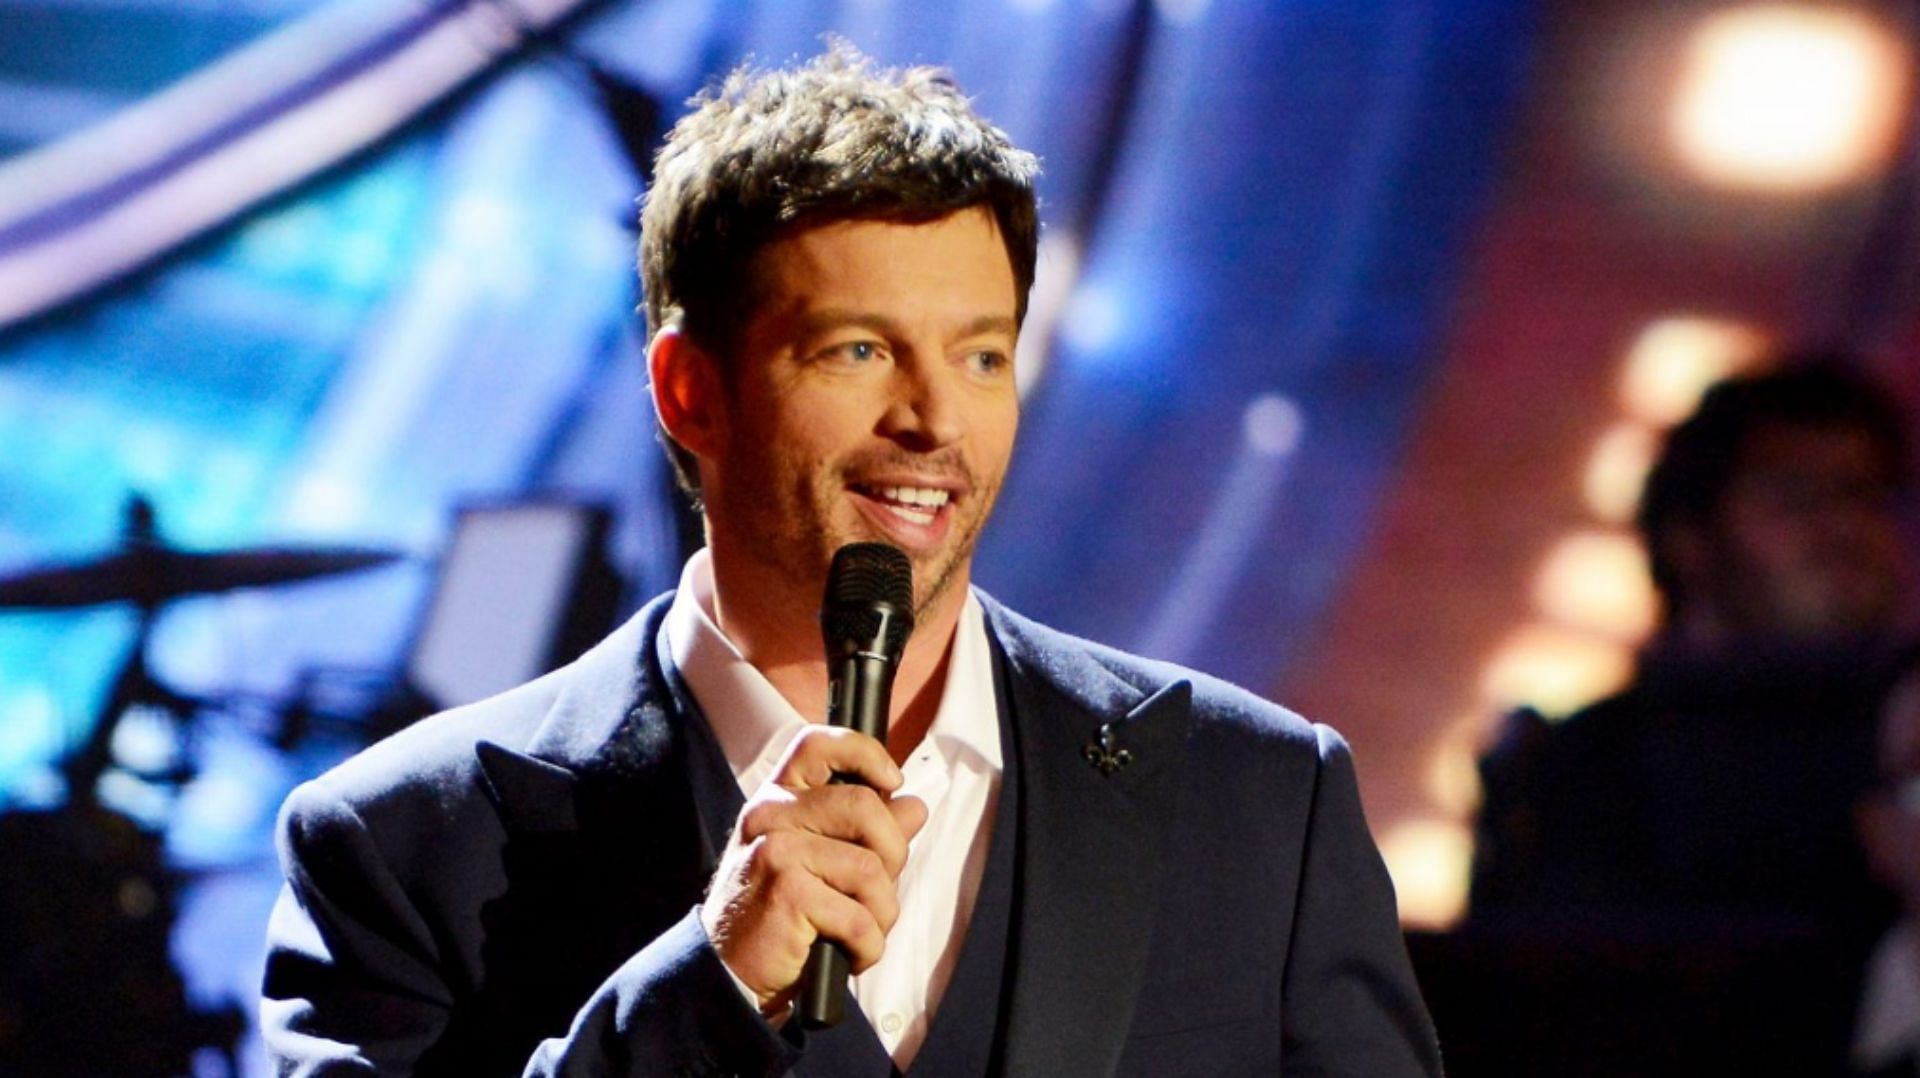 Harry Connick Jr Tour 2022 Tickets, where to buy, dates and more